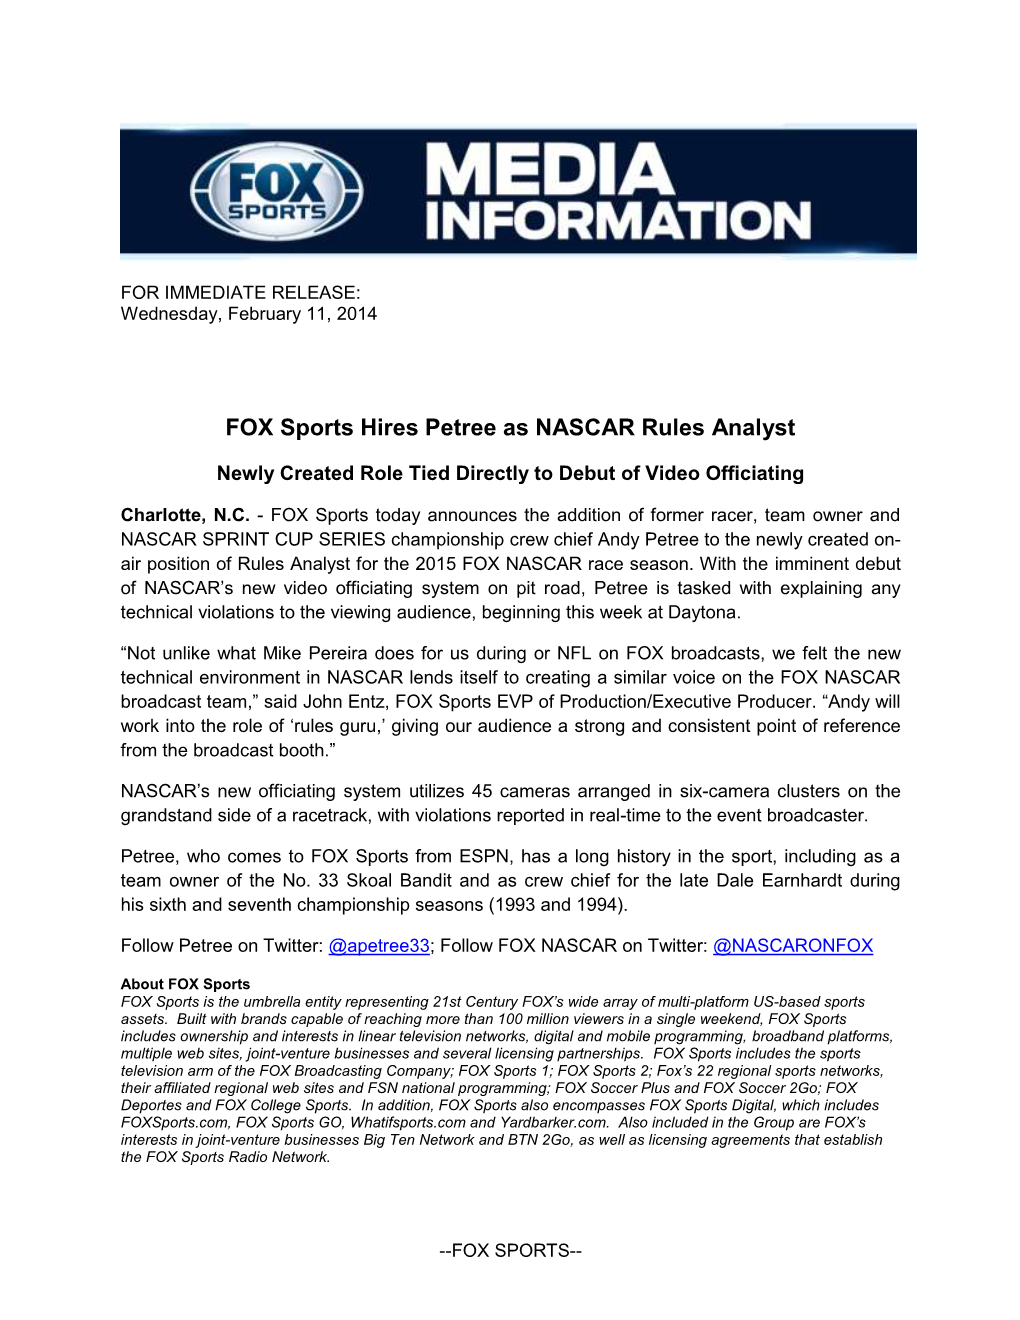 FOX Sports Hires Petree As NASCAR Rules Analyst